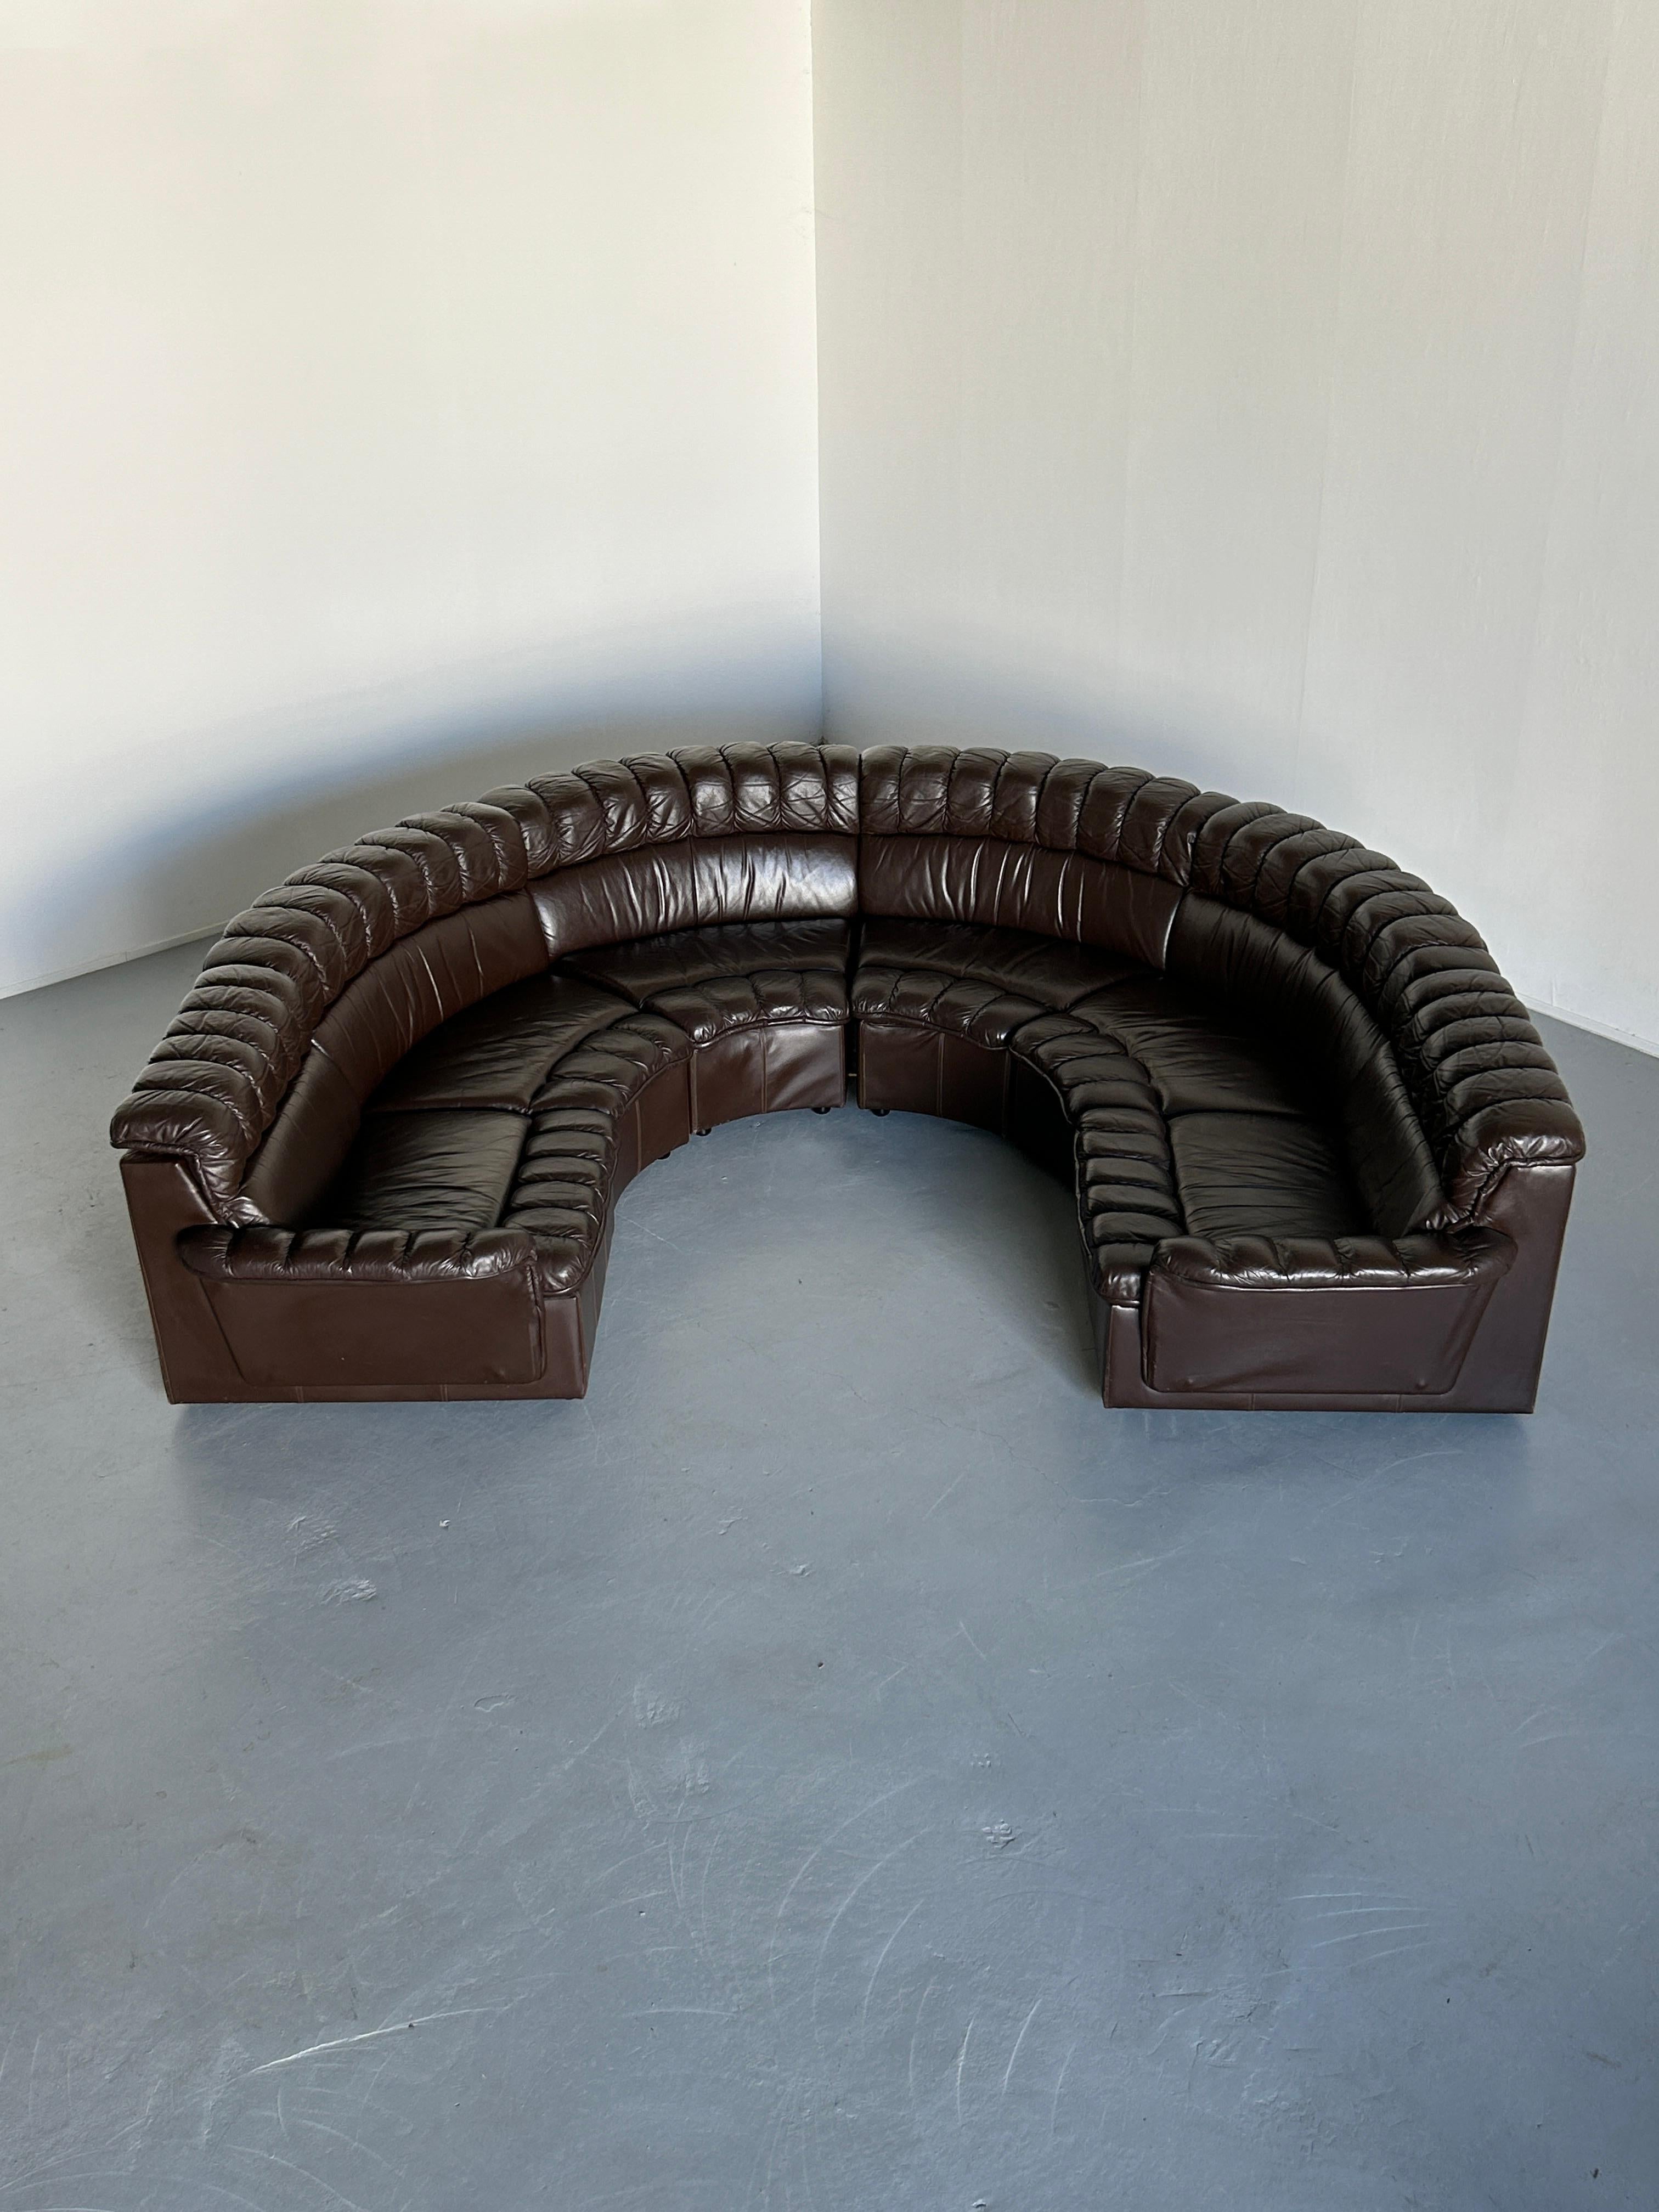 German Mid-Century-Modern Leather Snake Sofa in style of De Sede DS-600 Non-Stop, 1970s For Sale